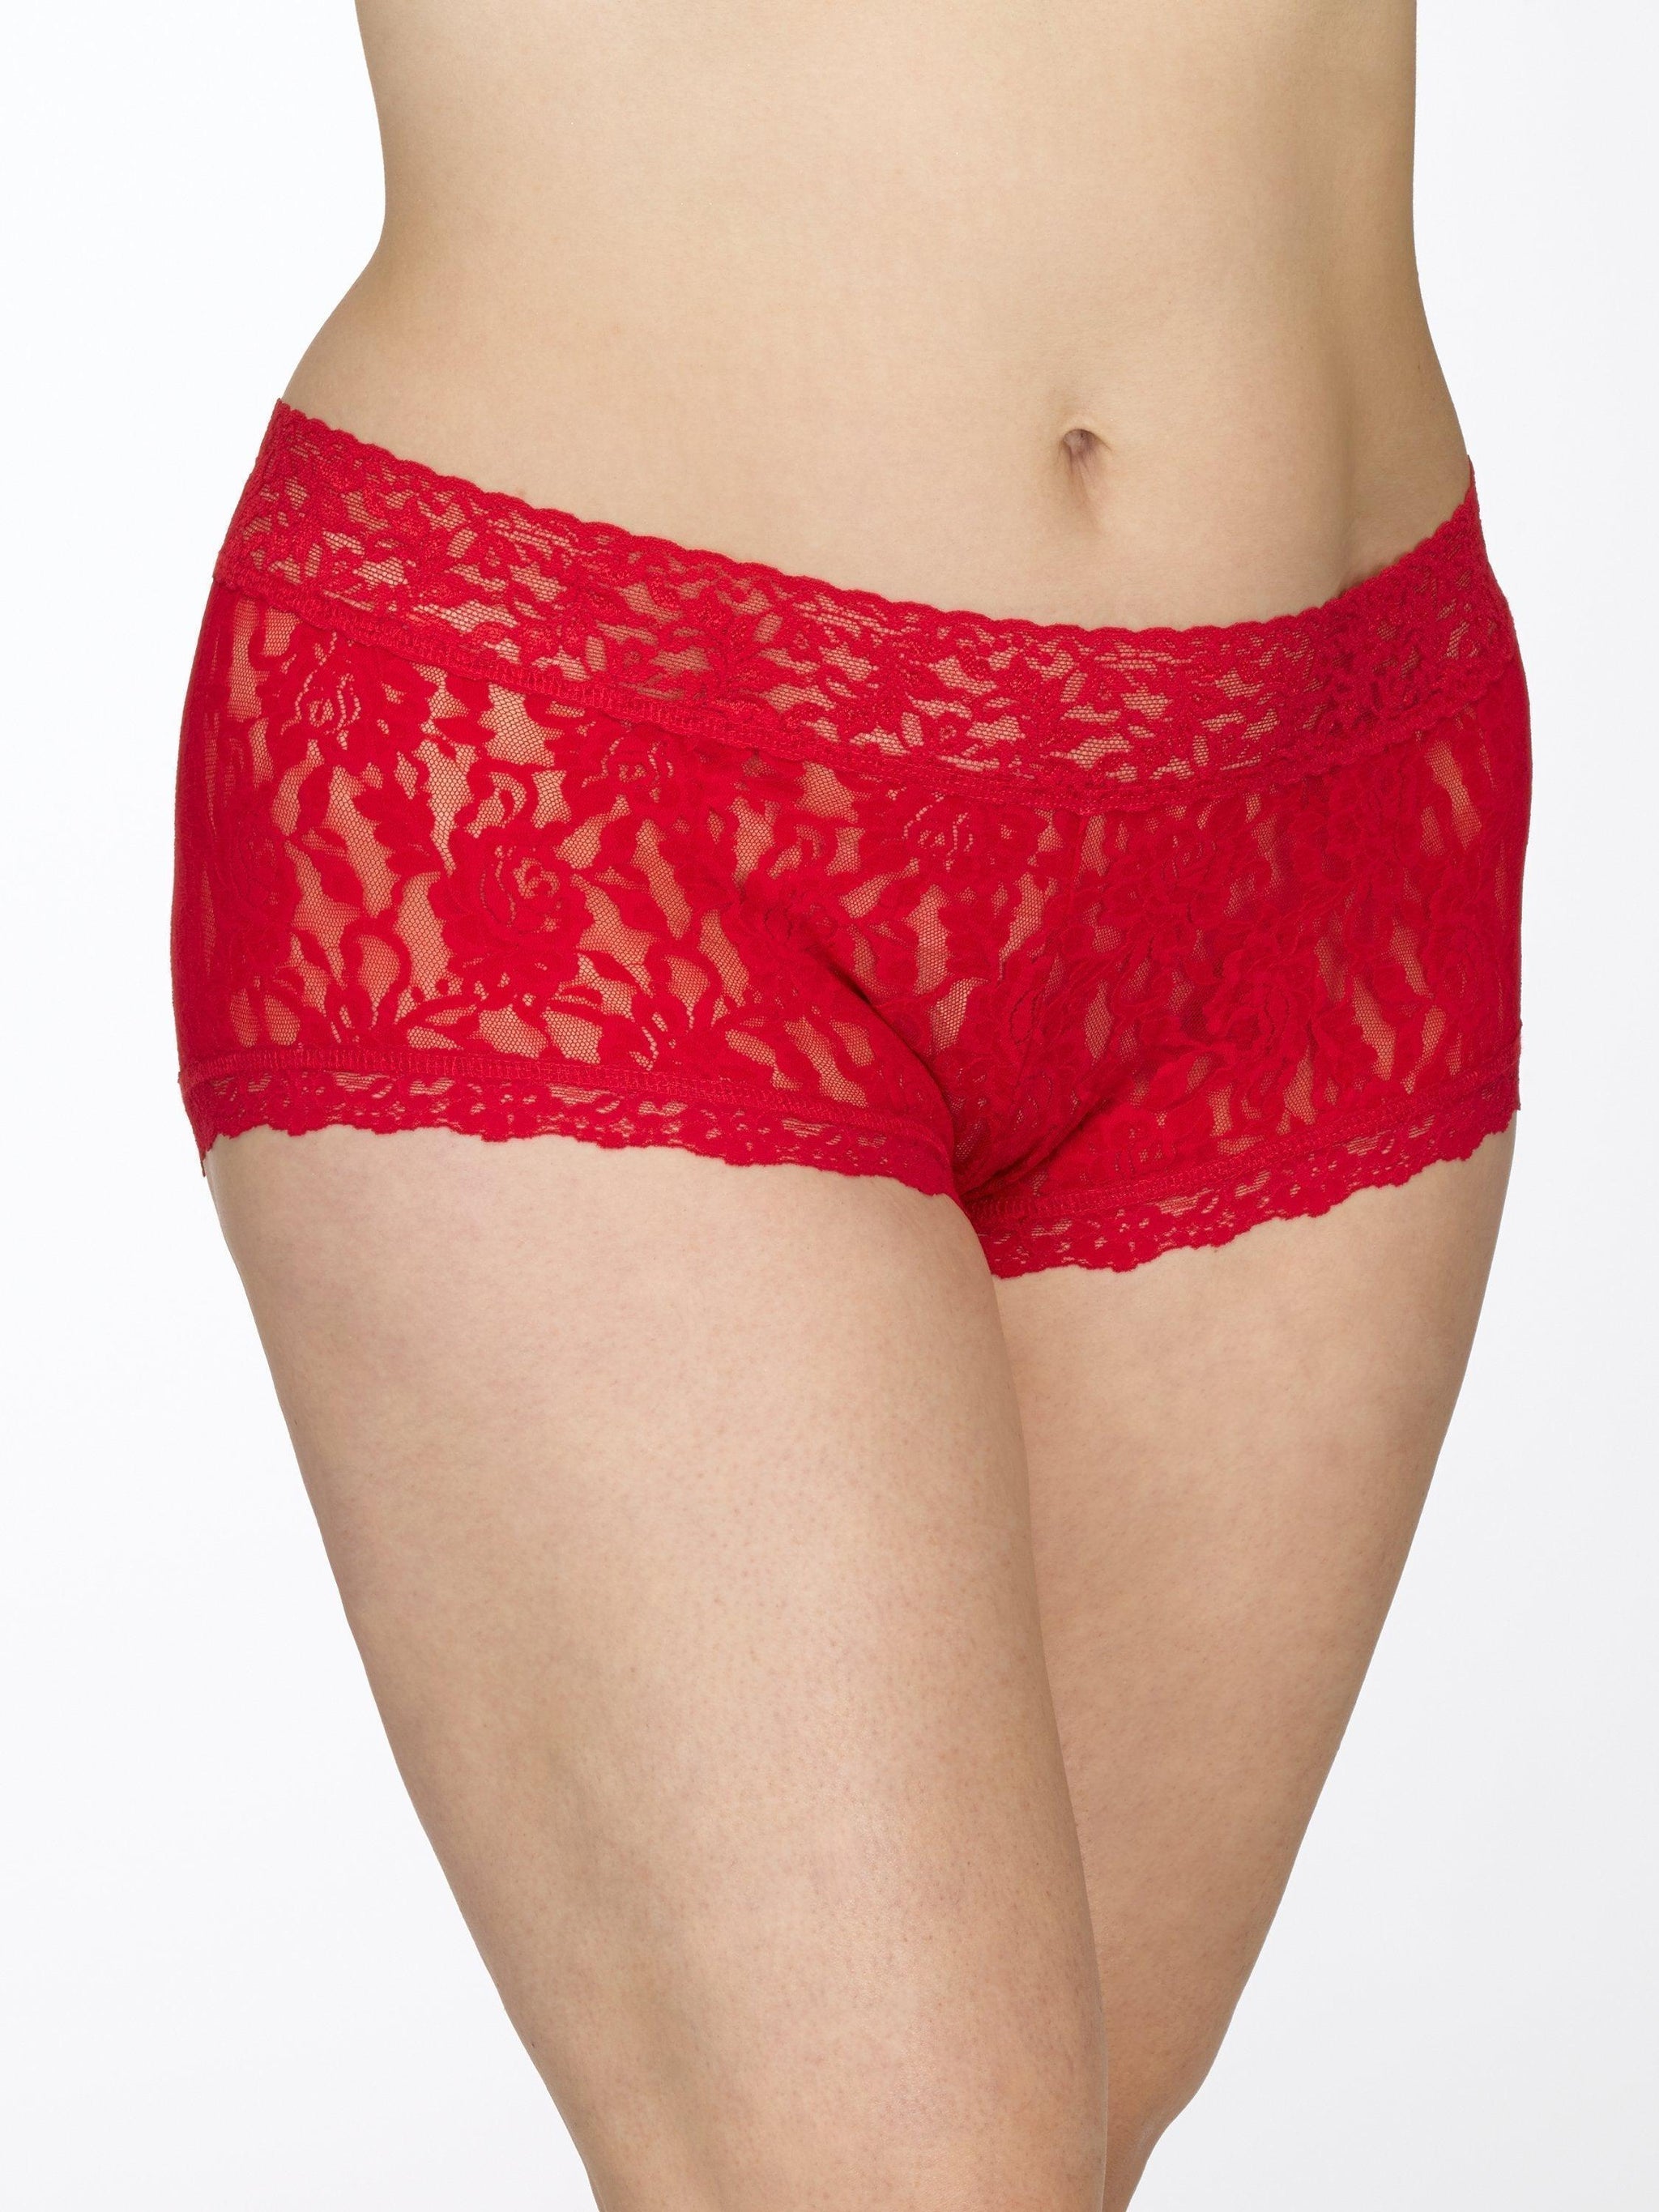 Lace Boyshorts & Hipster Underwear, Girl Boxers & French Briefs